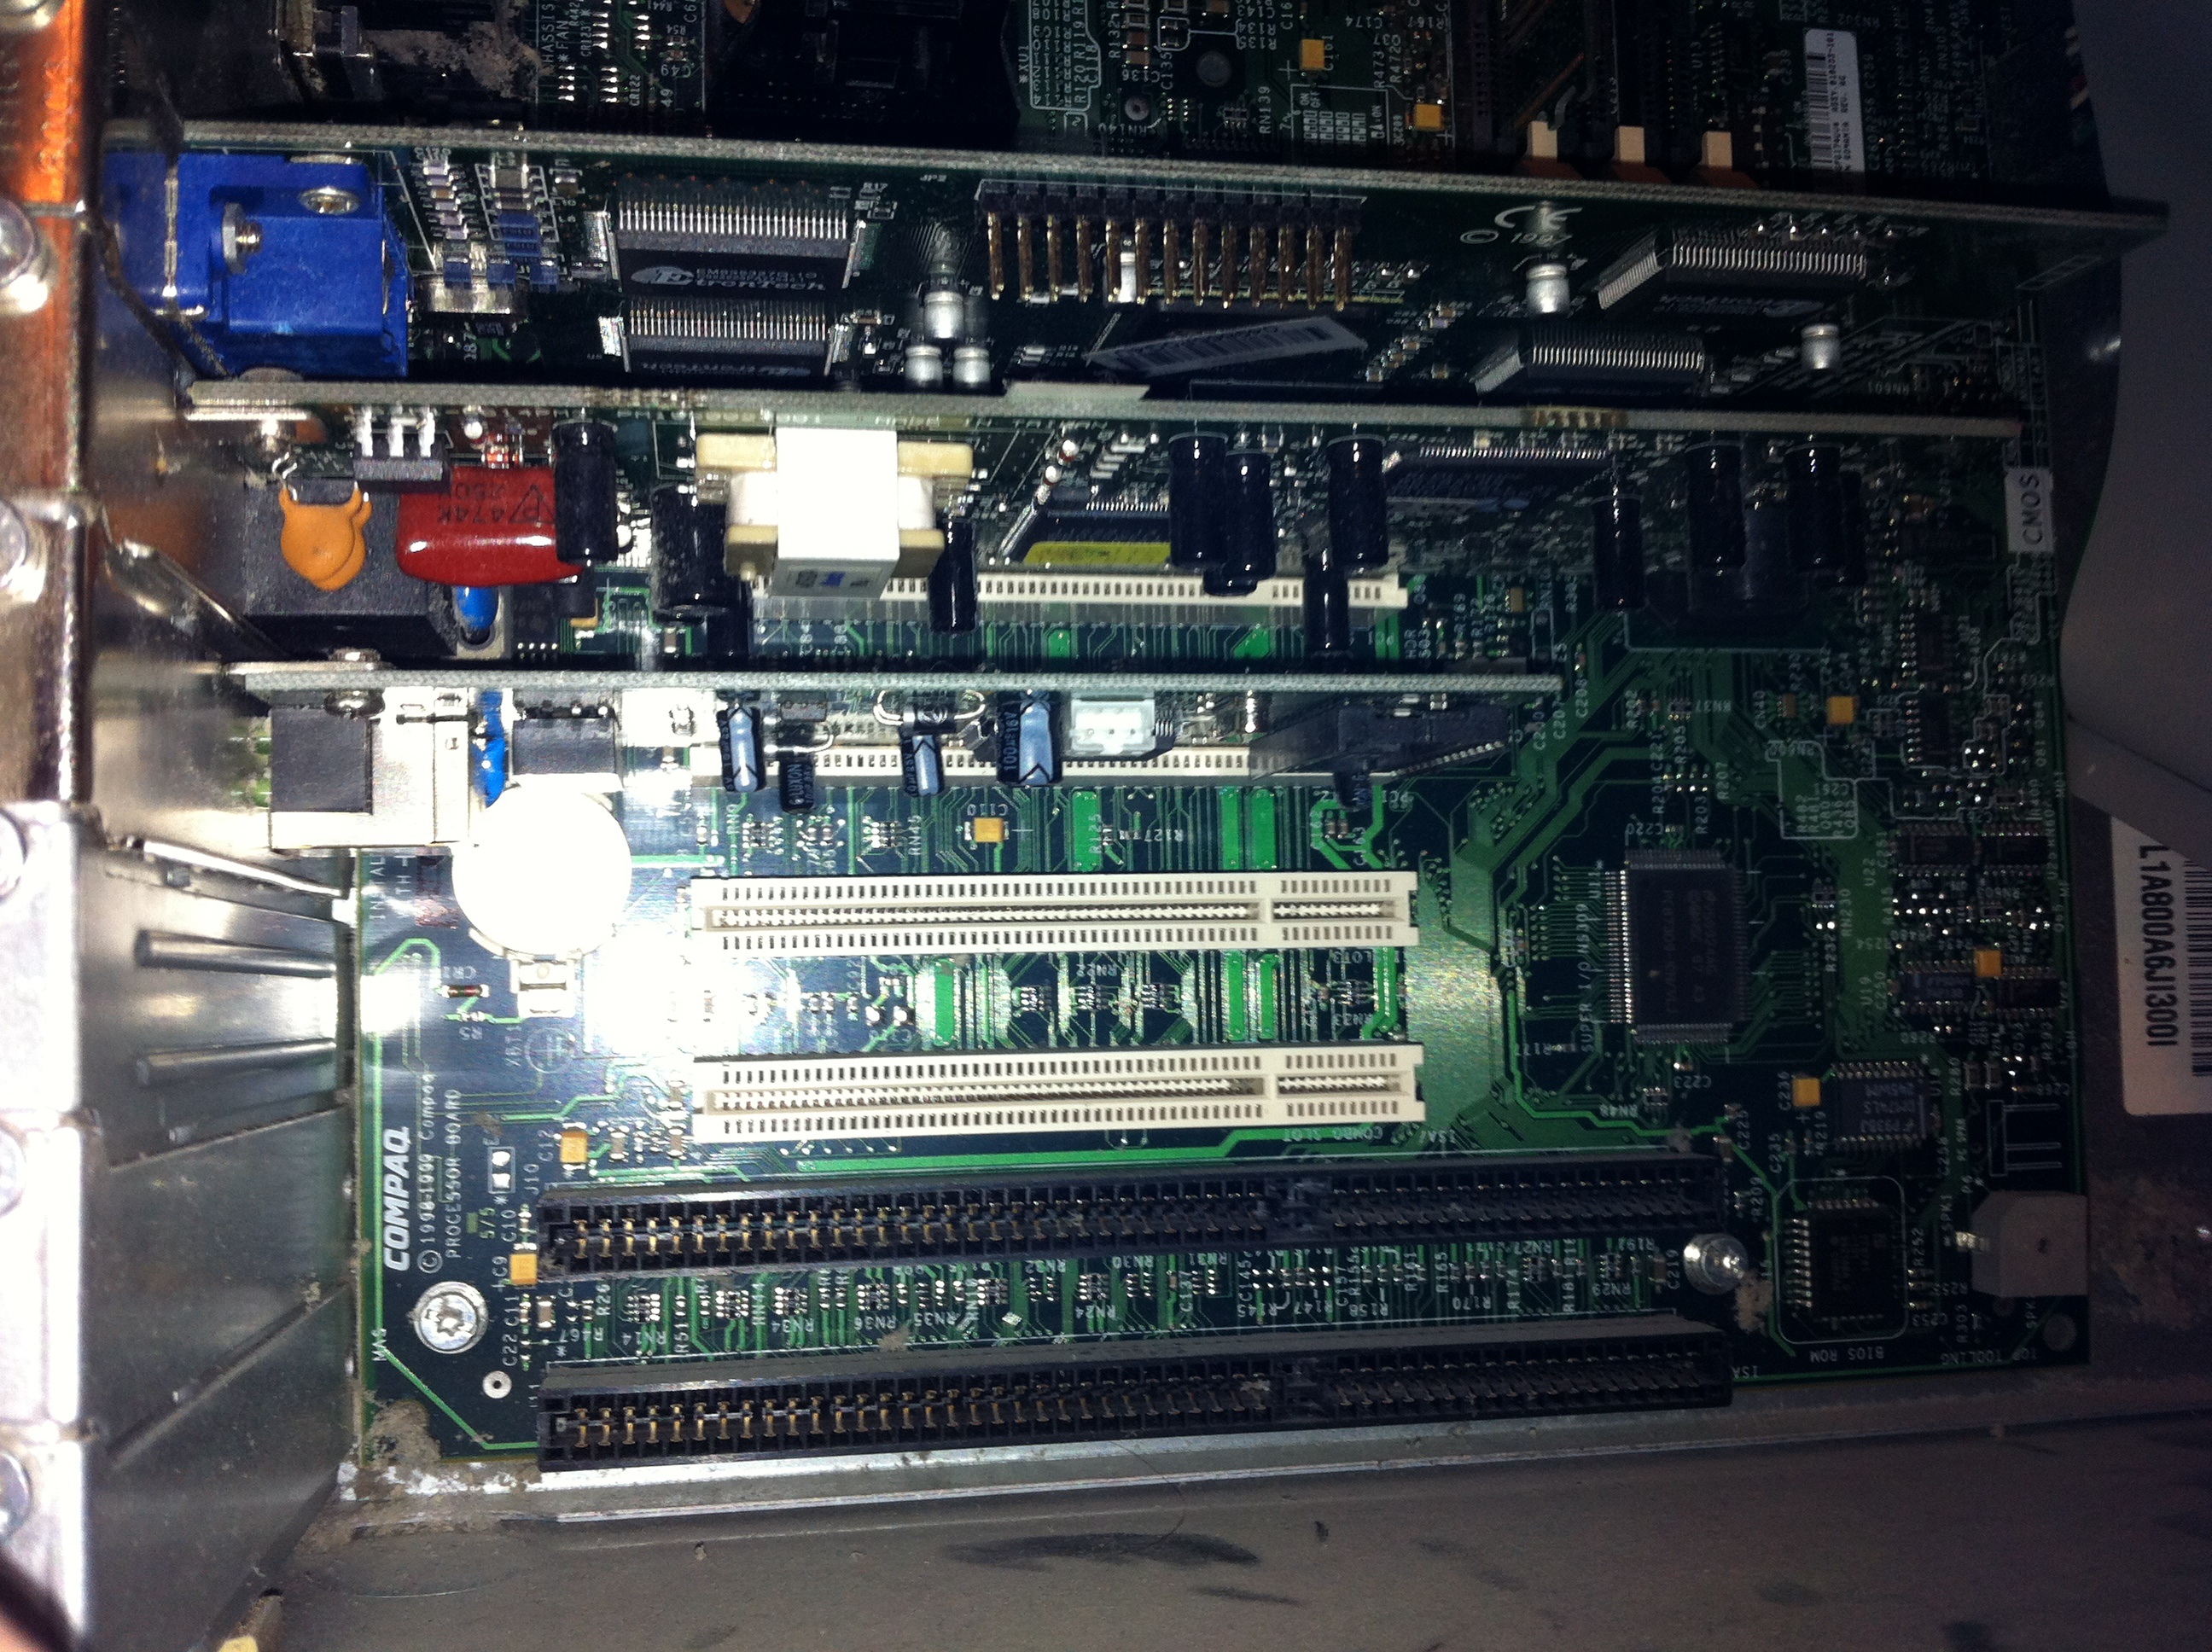 Video card and network cards. Missing is the sound card/controller port.